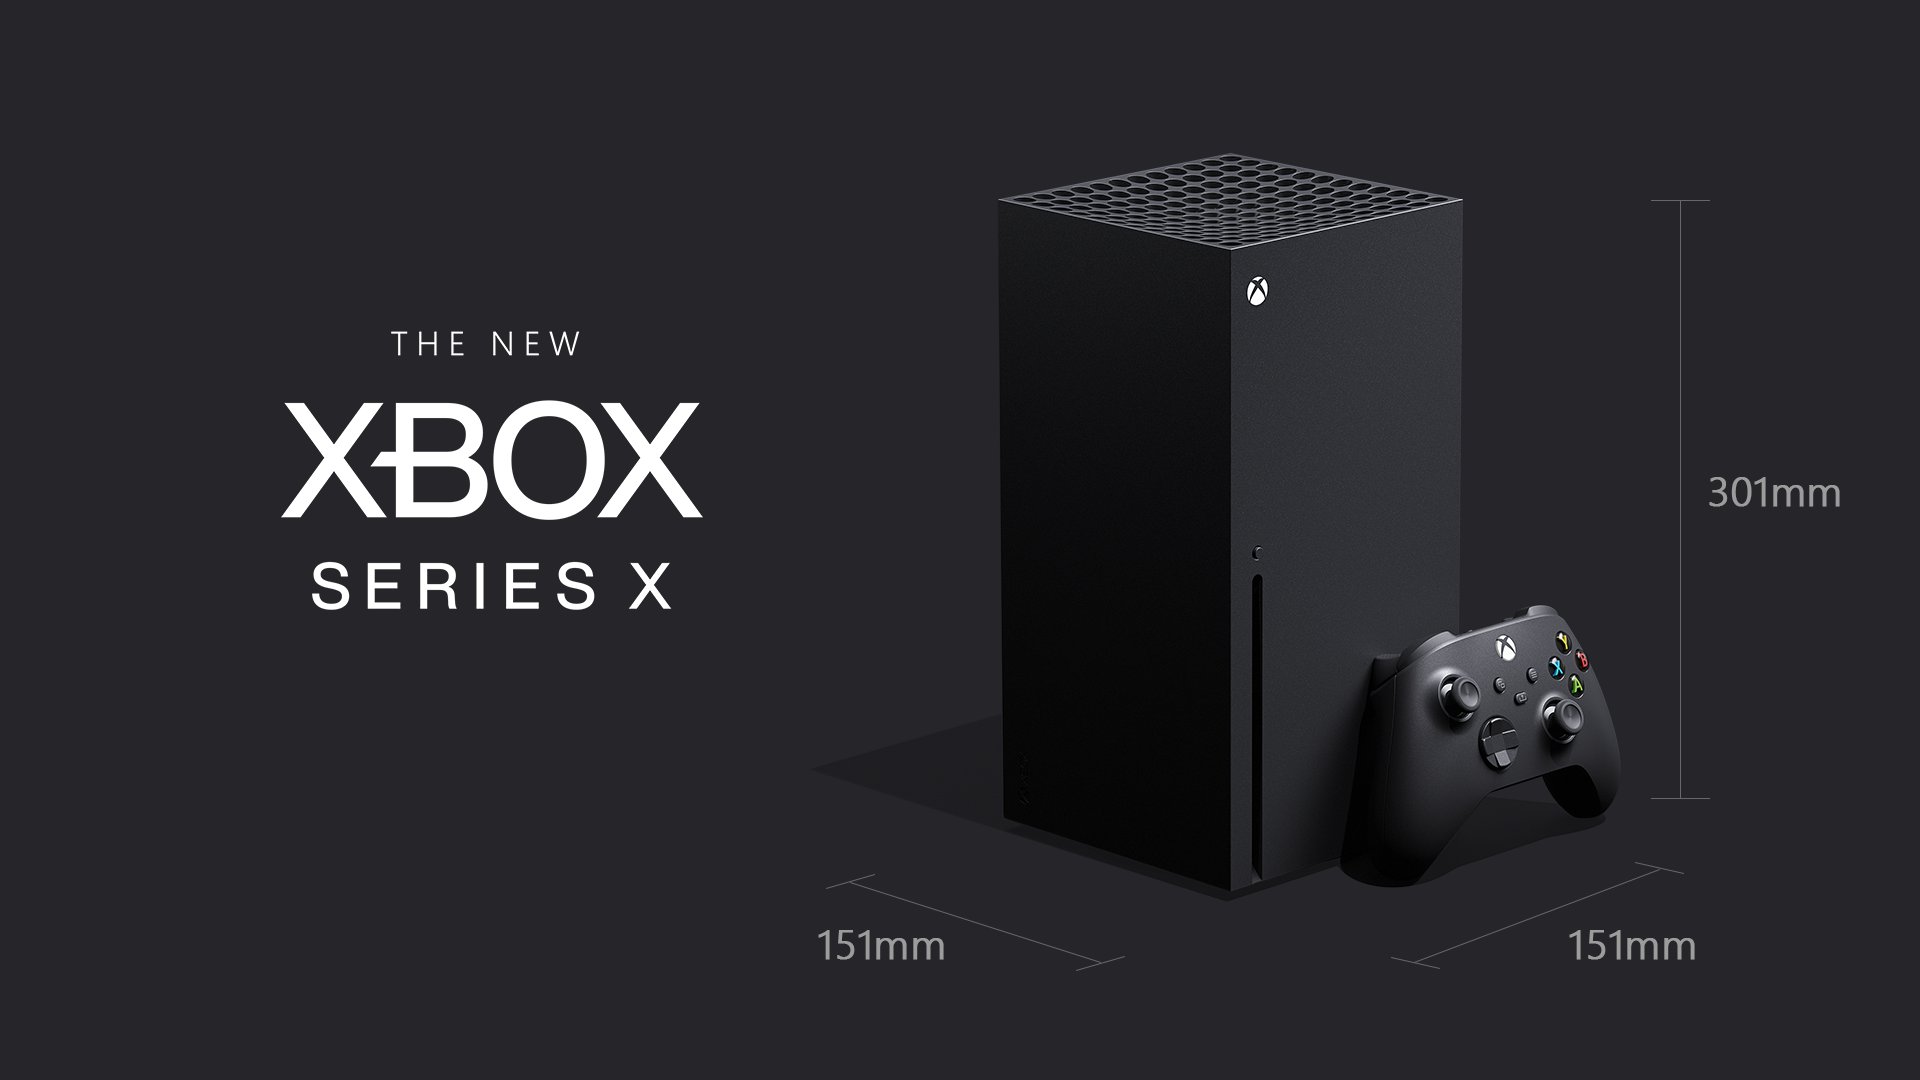 Pre-orders and launch of the Xbox Series X